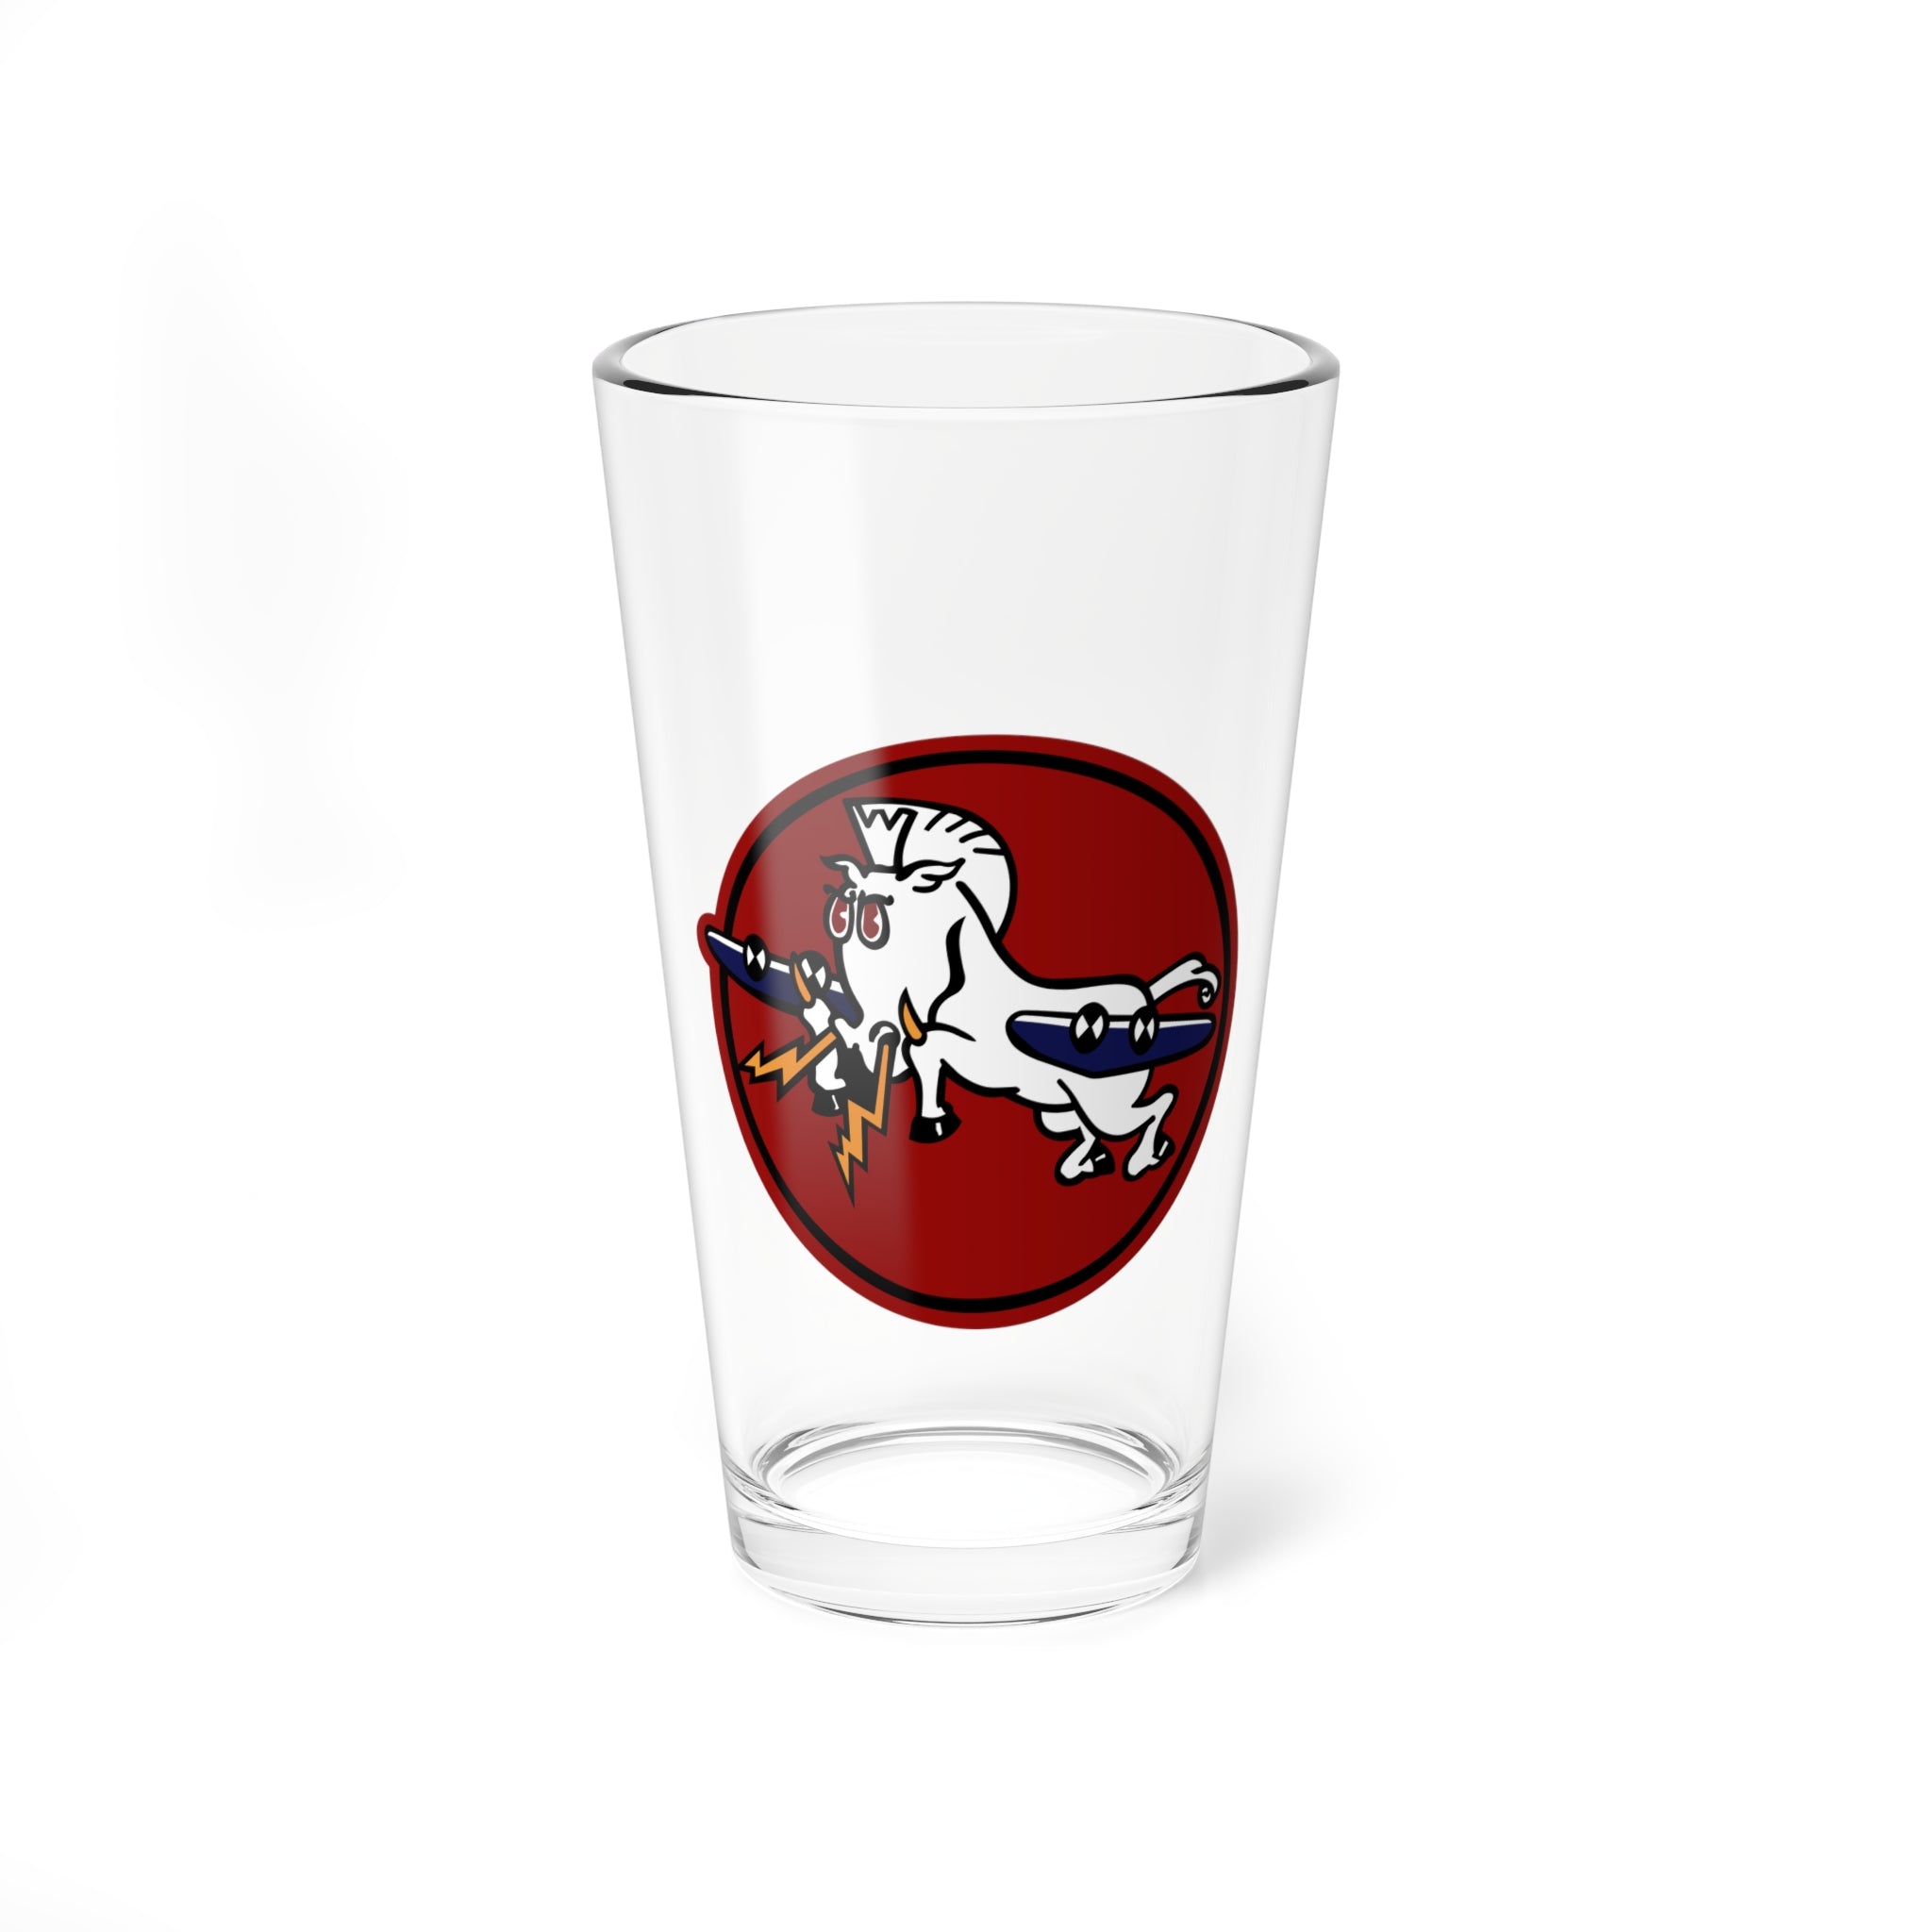 532nd Bomb Group Pint Glass, US AAF Bomb group under the 8th Air Force during WWII